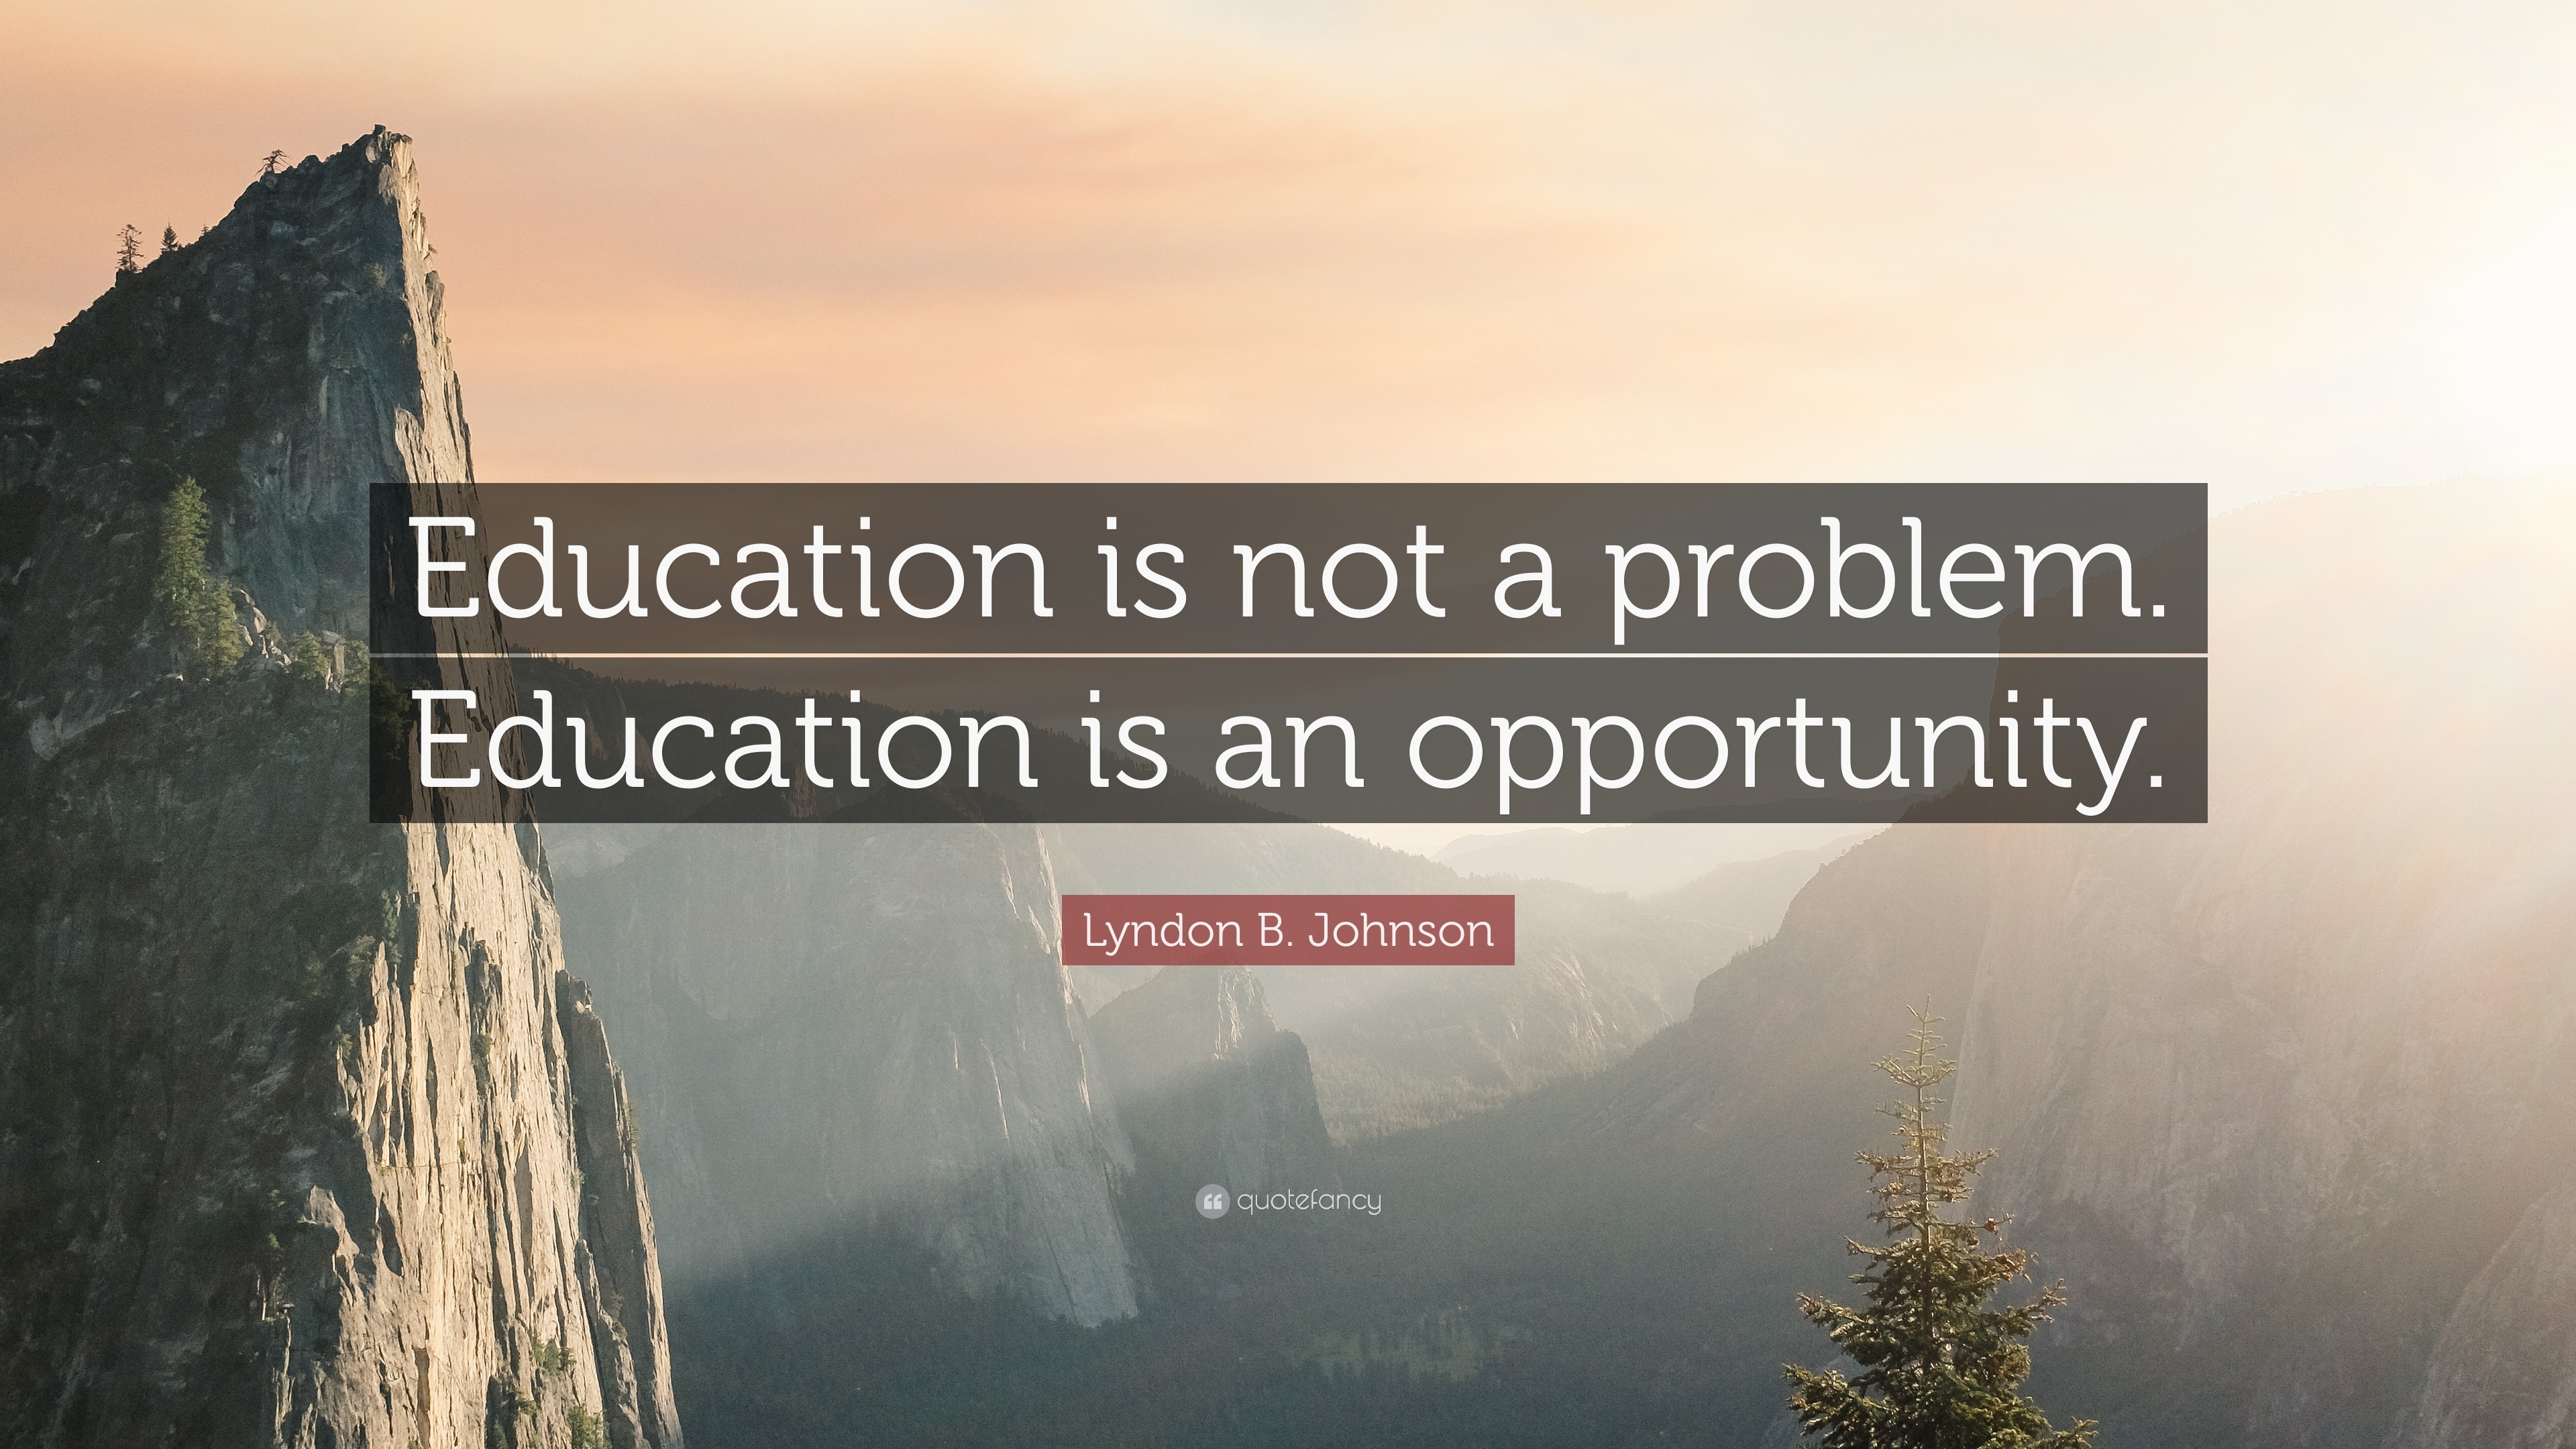 Lyndon B. Johnson Quote: “Education is not a problem. Education is an ...